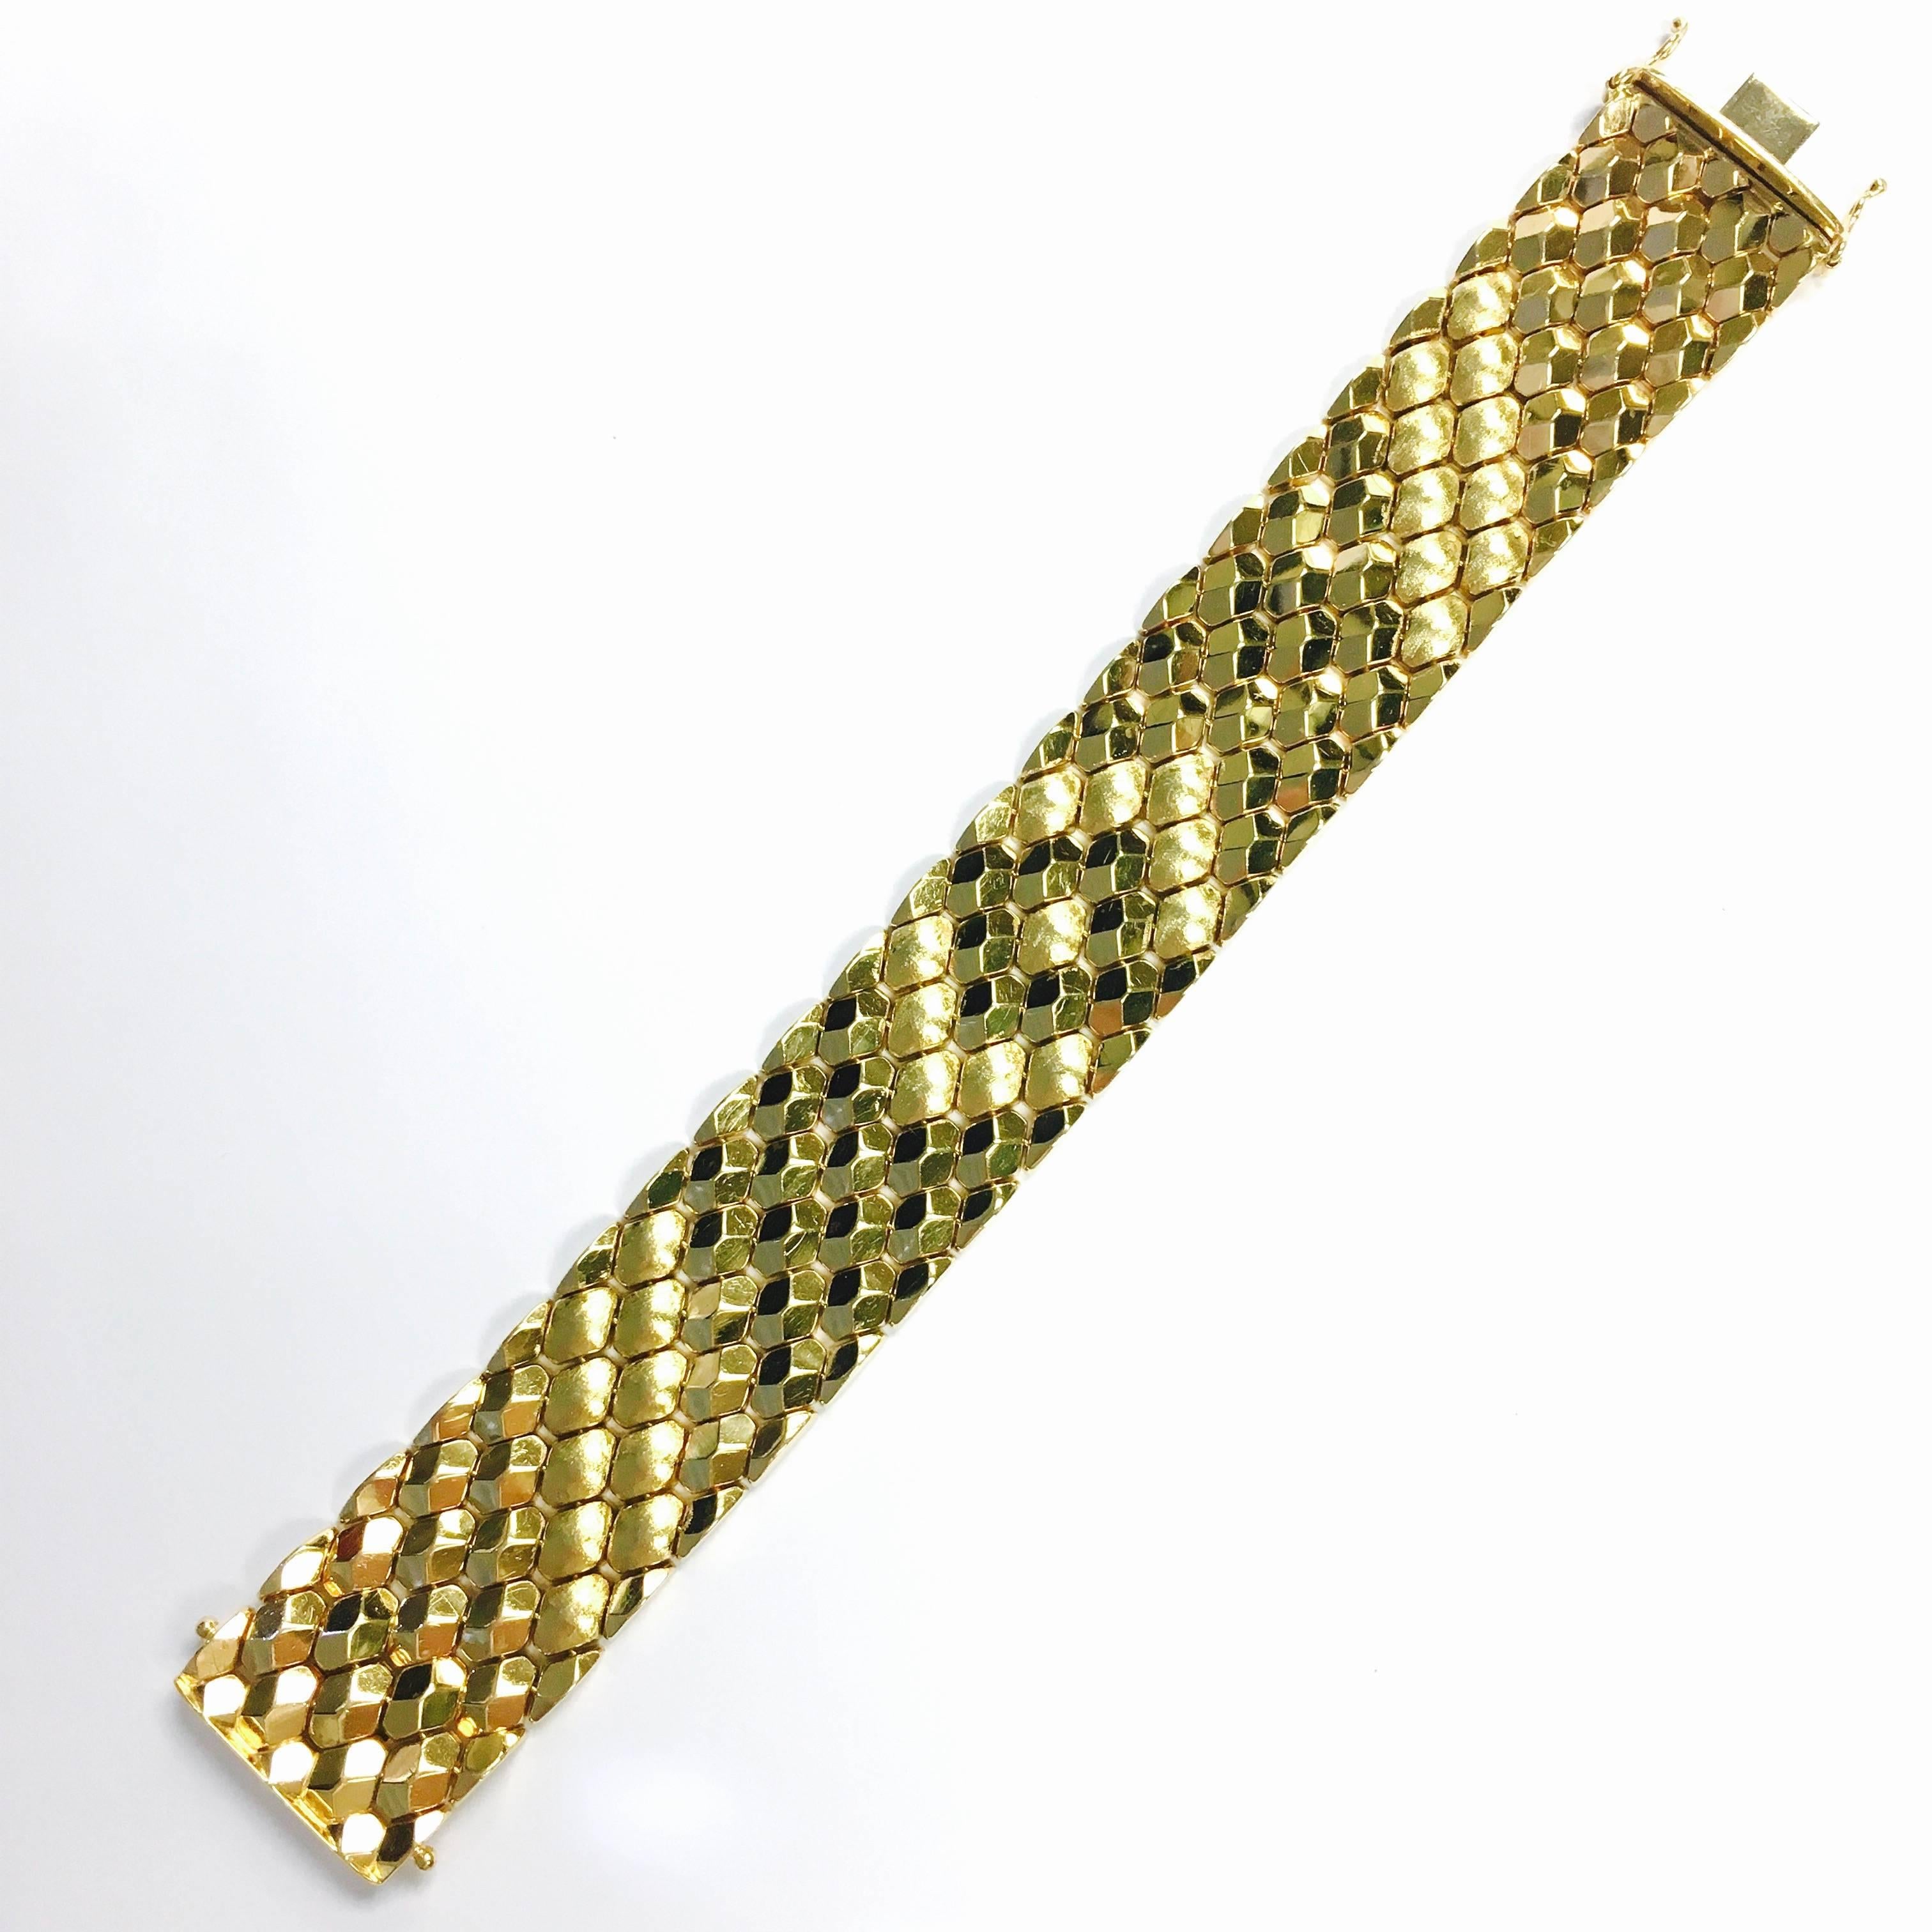 18K yellow gold 1 inch wide bracelet, featuring a honey comb design composed of polished and sating finish links. 7.5 inch length terminating in a hidden clasp with two safety eight closures. 
Weight: 60.2 grams
Marked: FOMP 750 and the factory mark